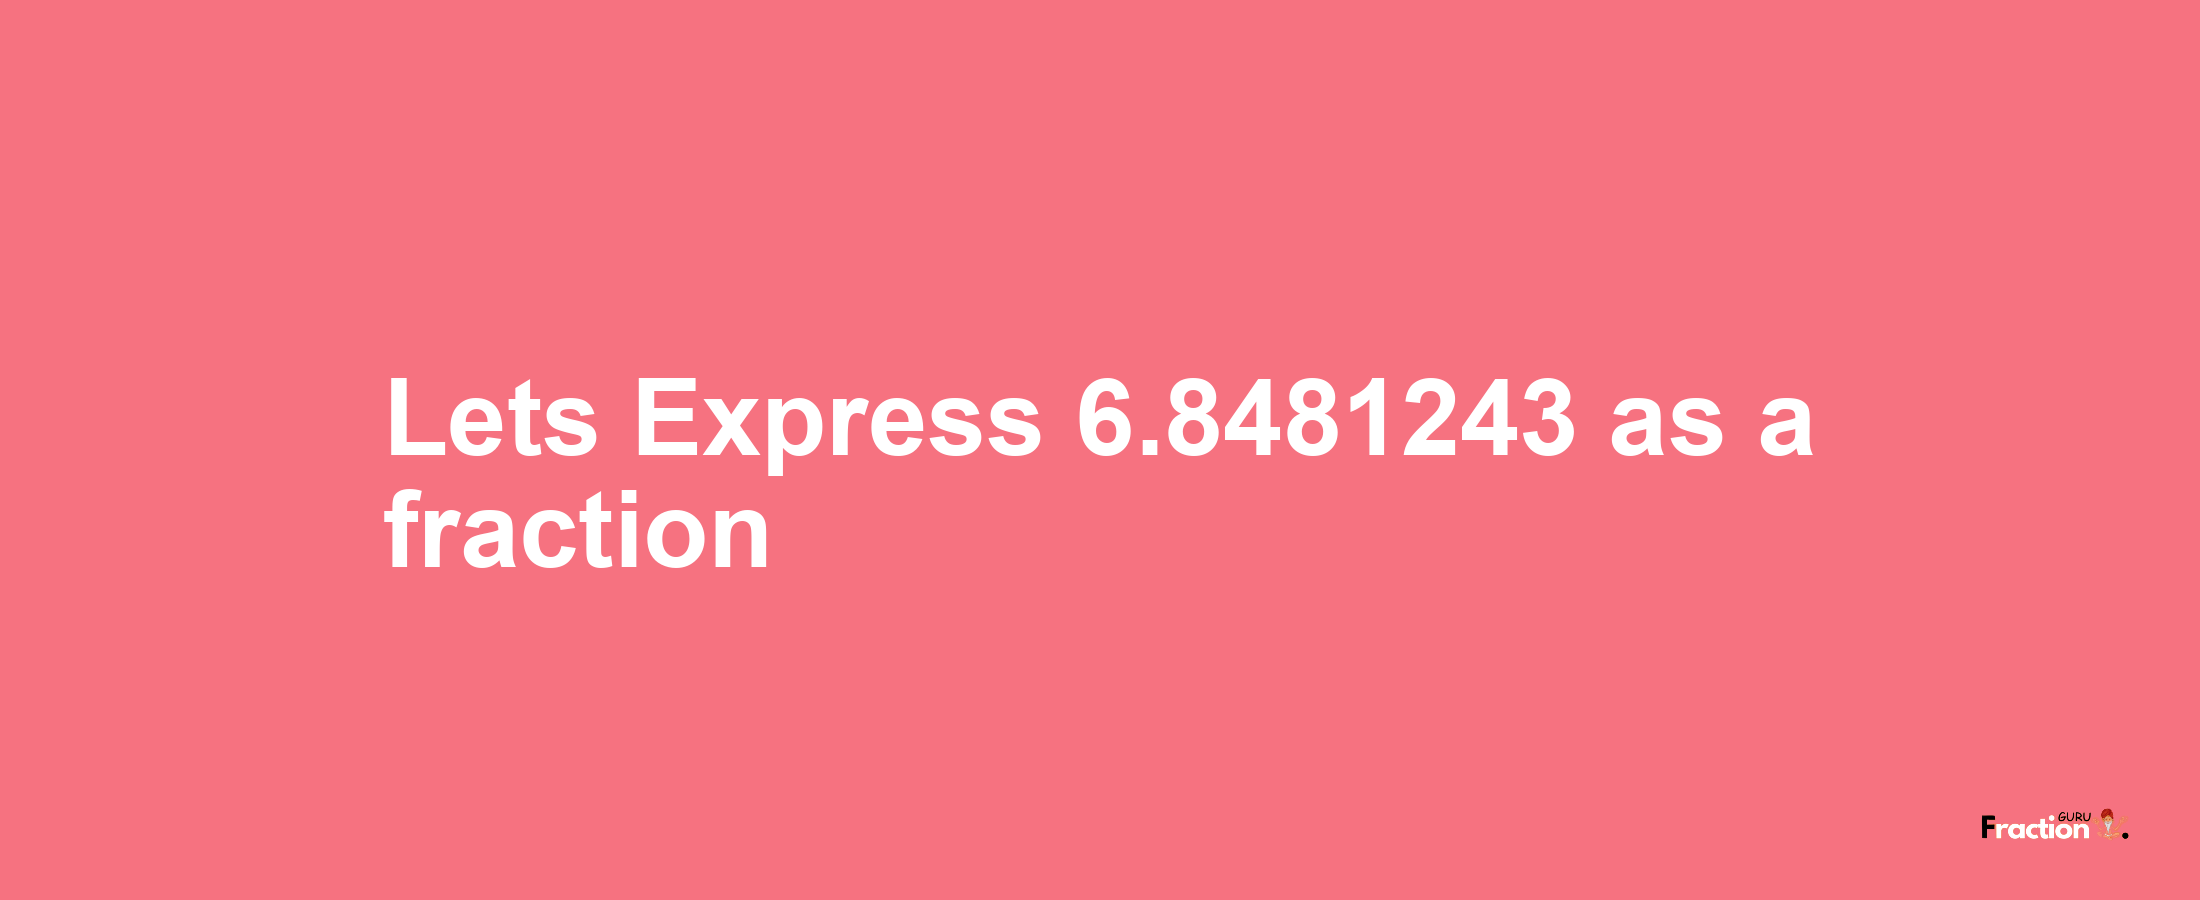 Lets Express 6.8481243 as afraction